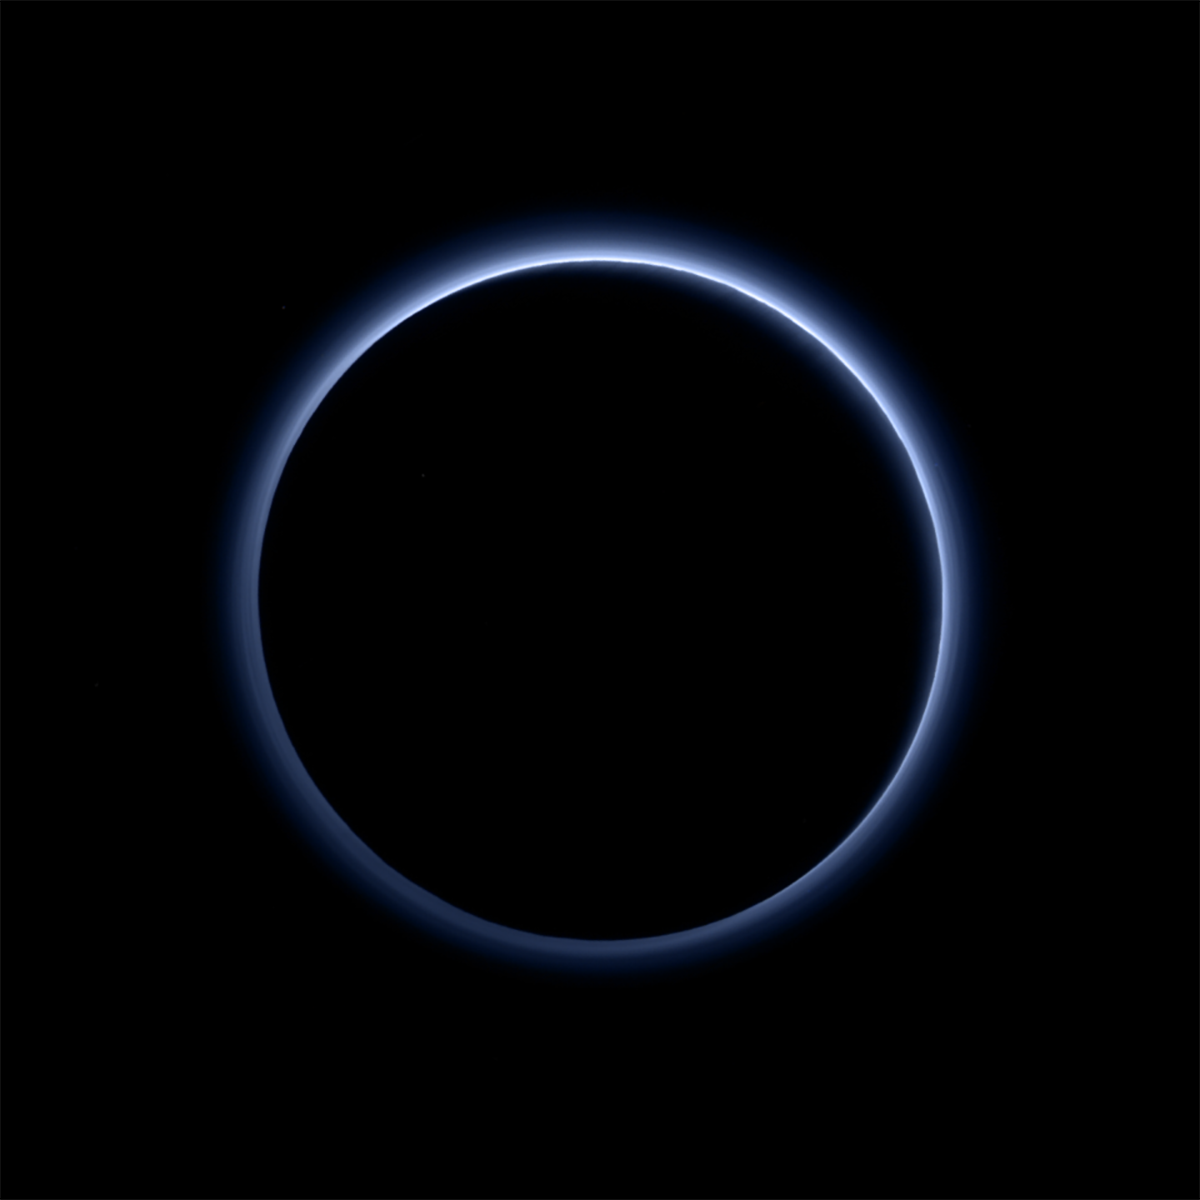 The blue skies of Pluto, as seen in this image from New Horizons. Pluto is backlit by the Sun, revealing the multilayered hazes in the atmosphere. Soot-like particles in the atmosphere scatter sunlight in a way that the atmosphere appears blue, similar to what happens on Earth. Image Credit: NASA/JHUAPL/SwRI